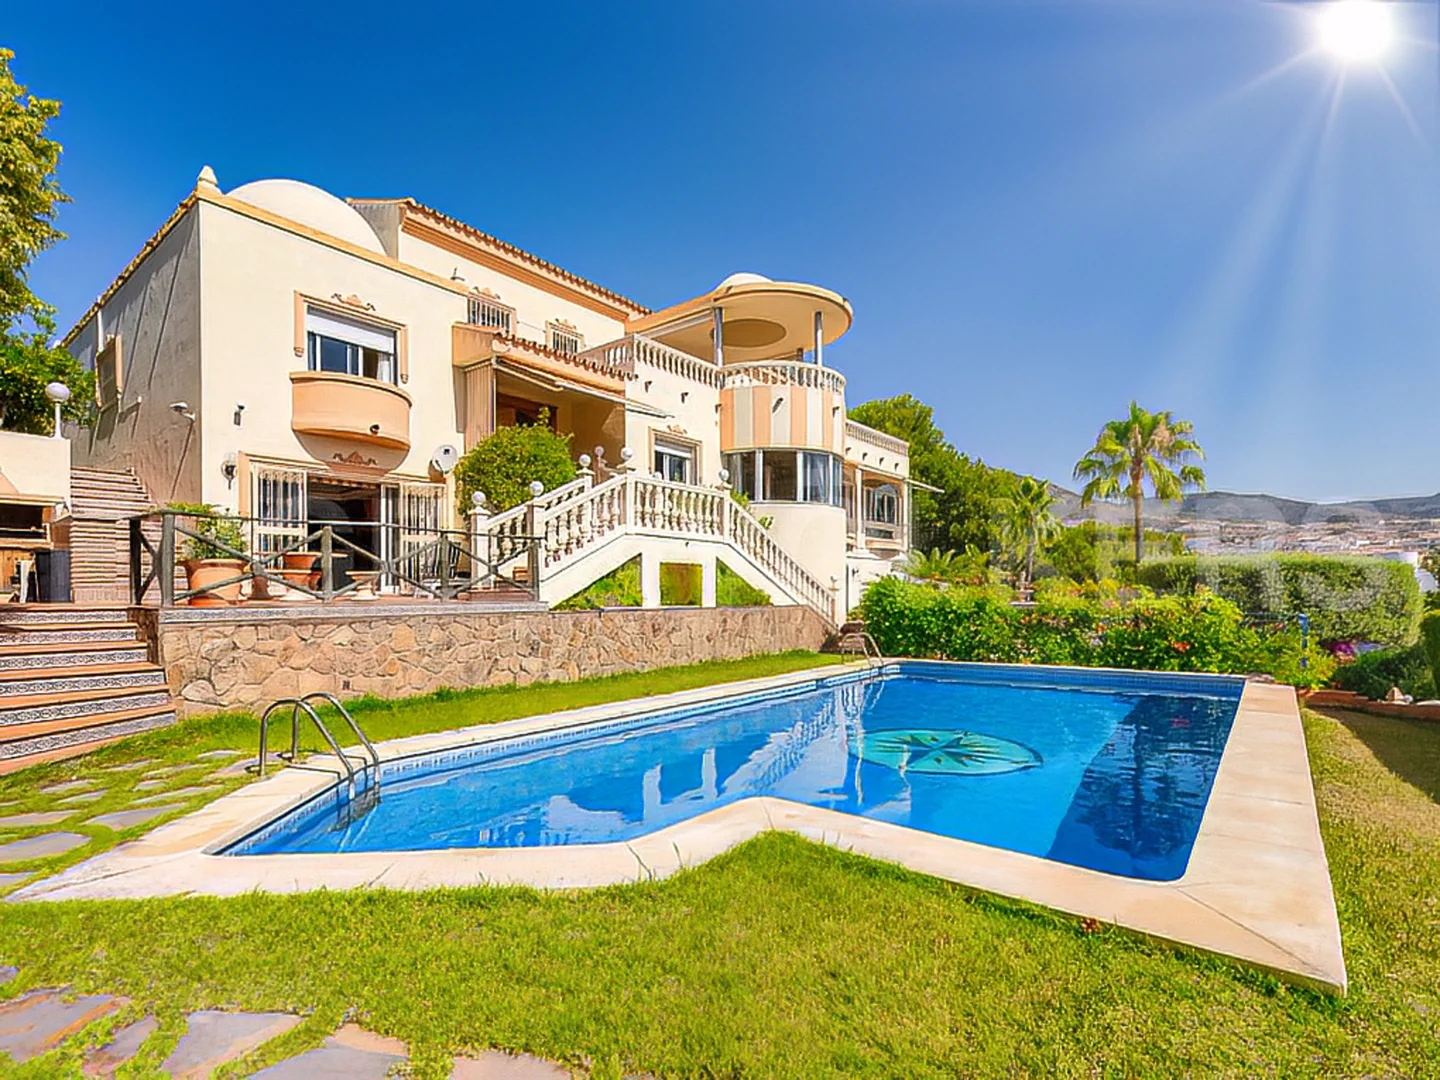 7-bedroom villa with independent apartment and pool